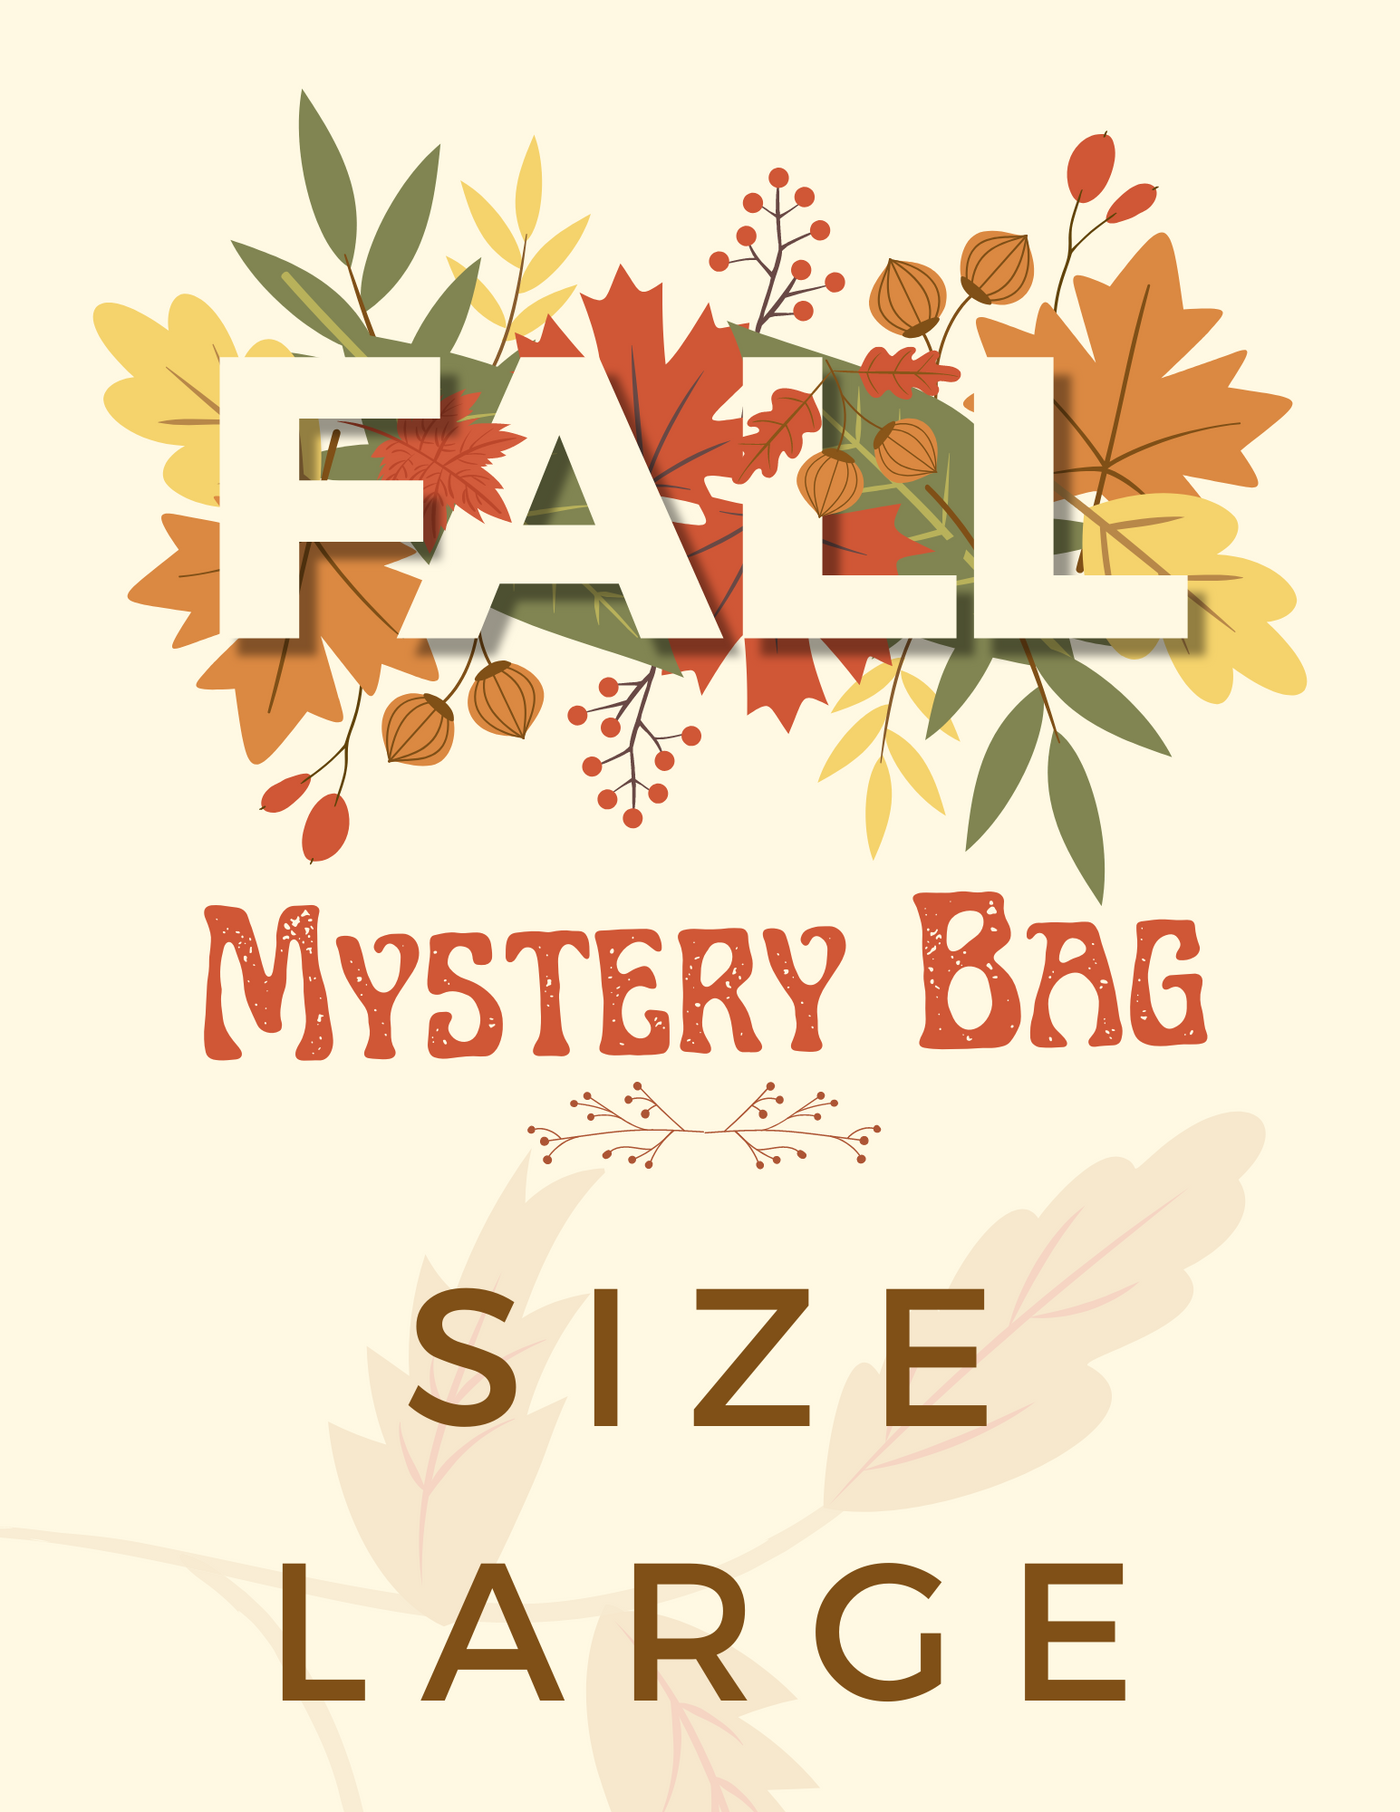 LARGE - Mystery bag